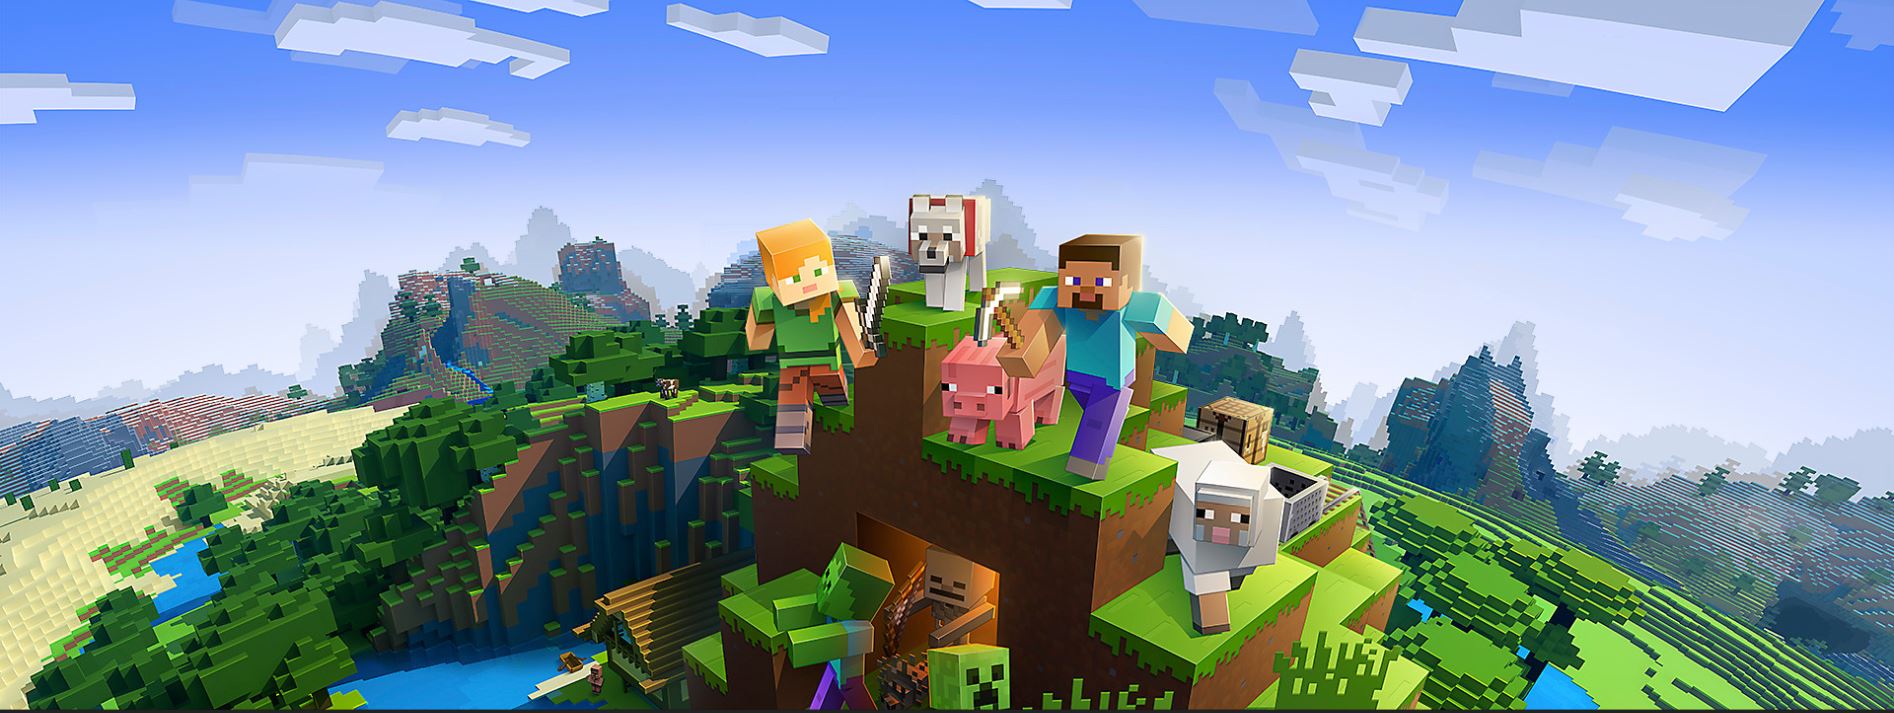 Mojang Studios Confirms That Minecraft Will Have Its Own Broadcasted Event This Year